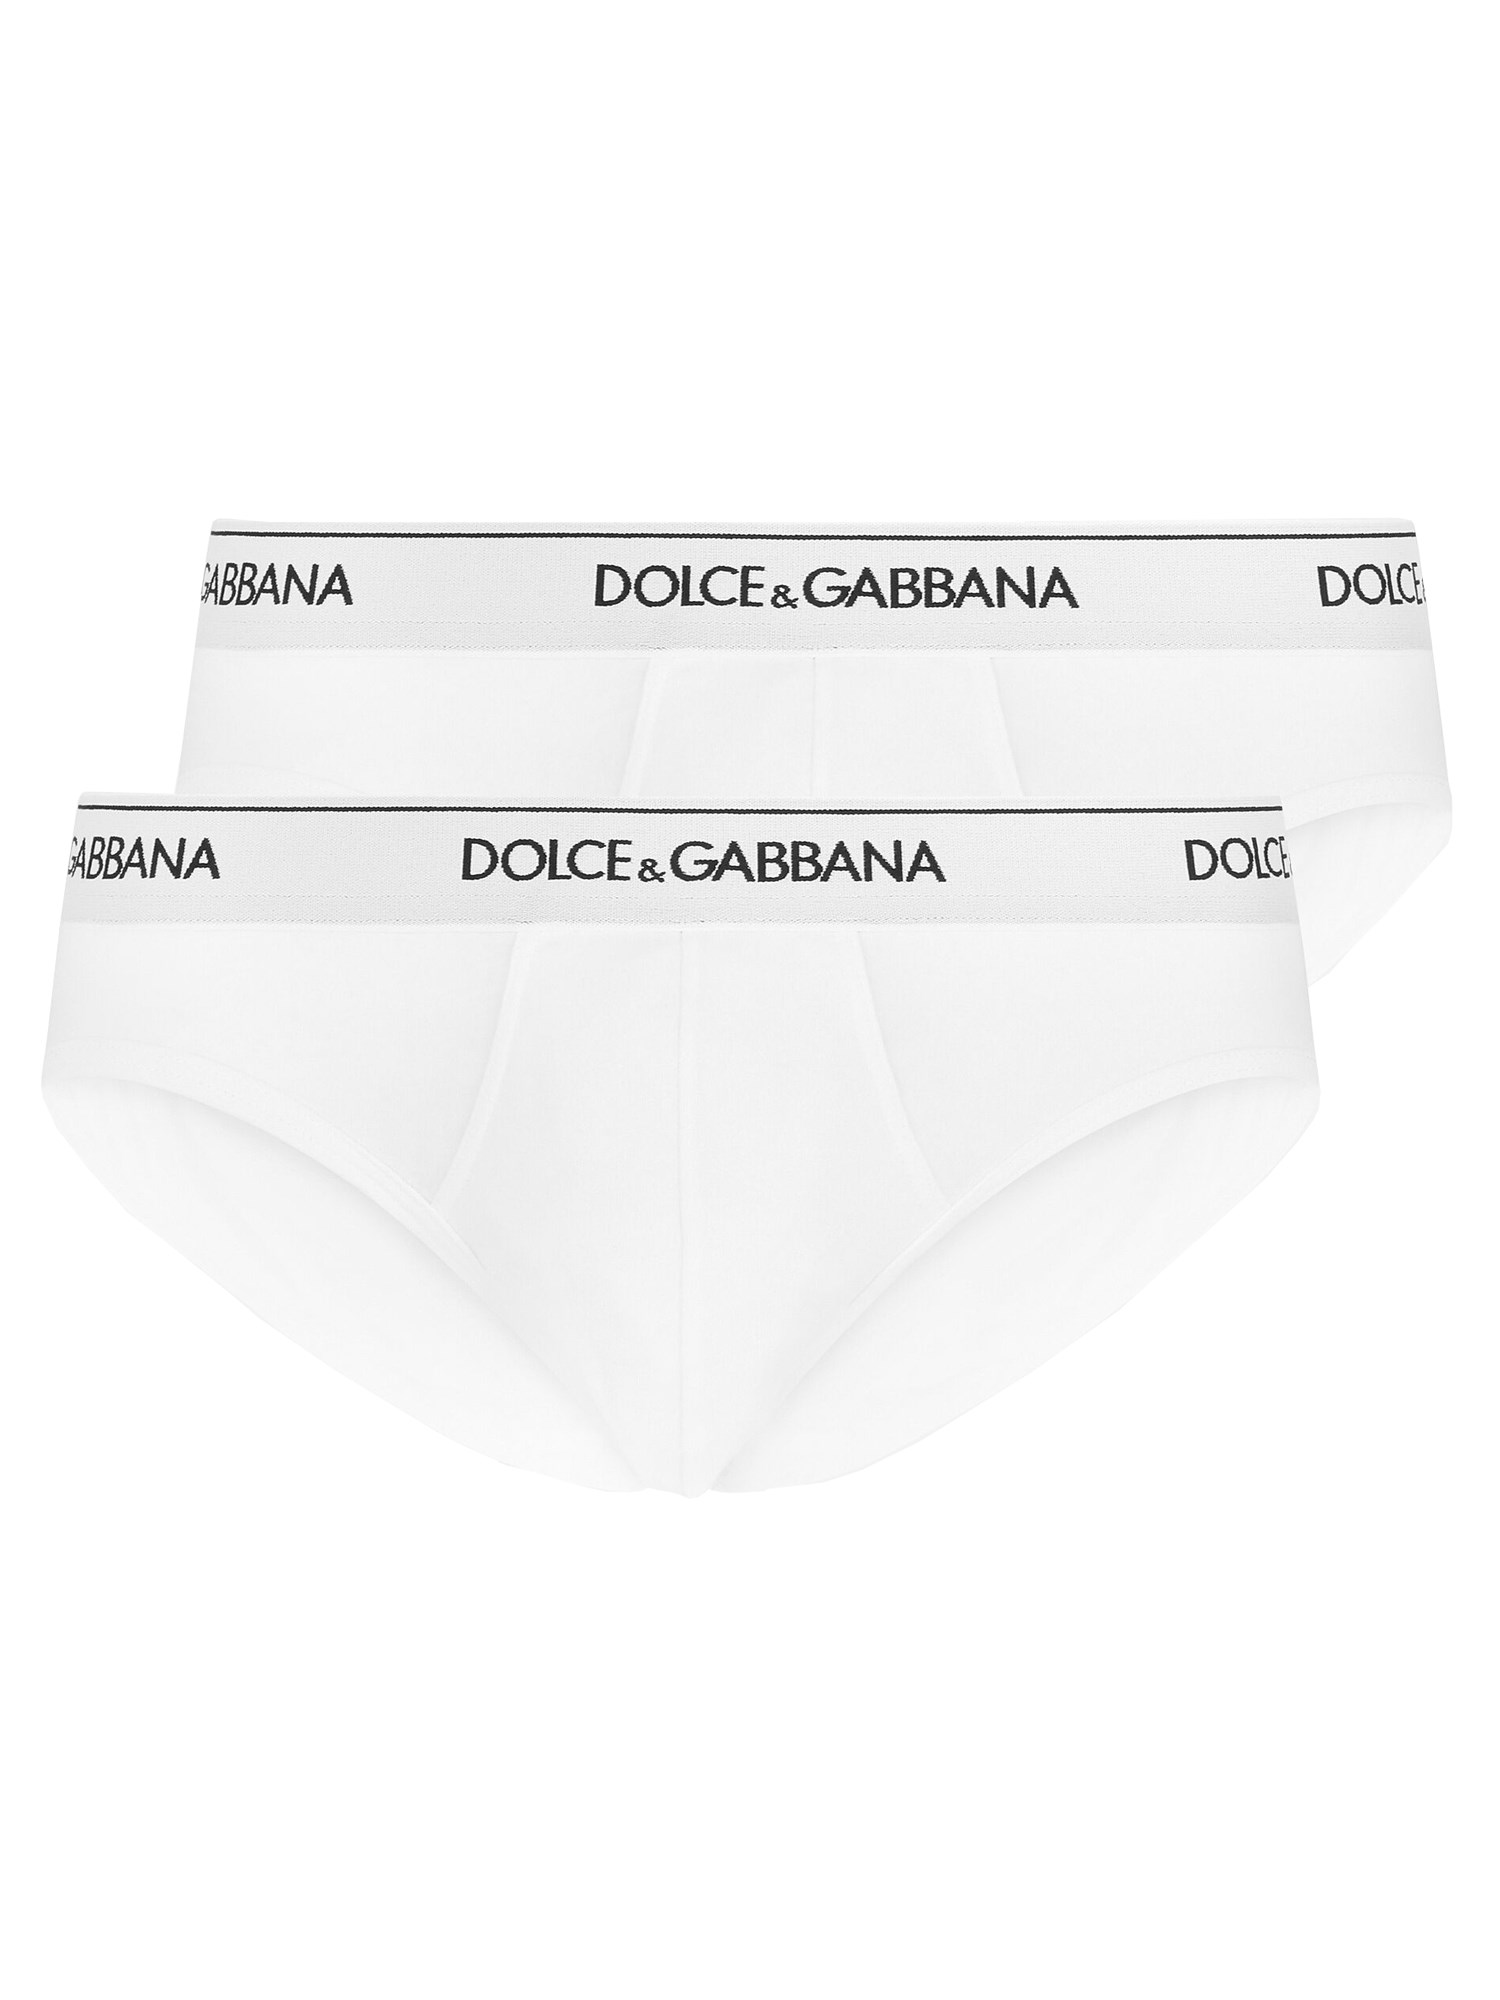 dolce & gabbana two-pack of logo briefs